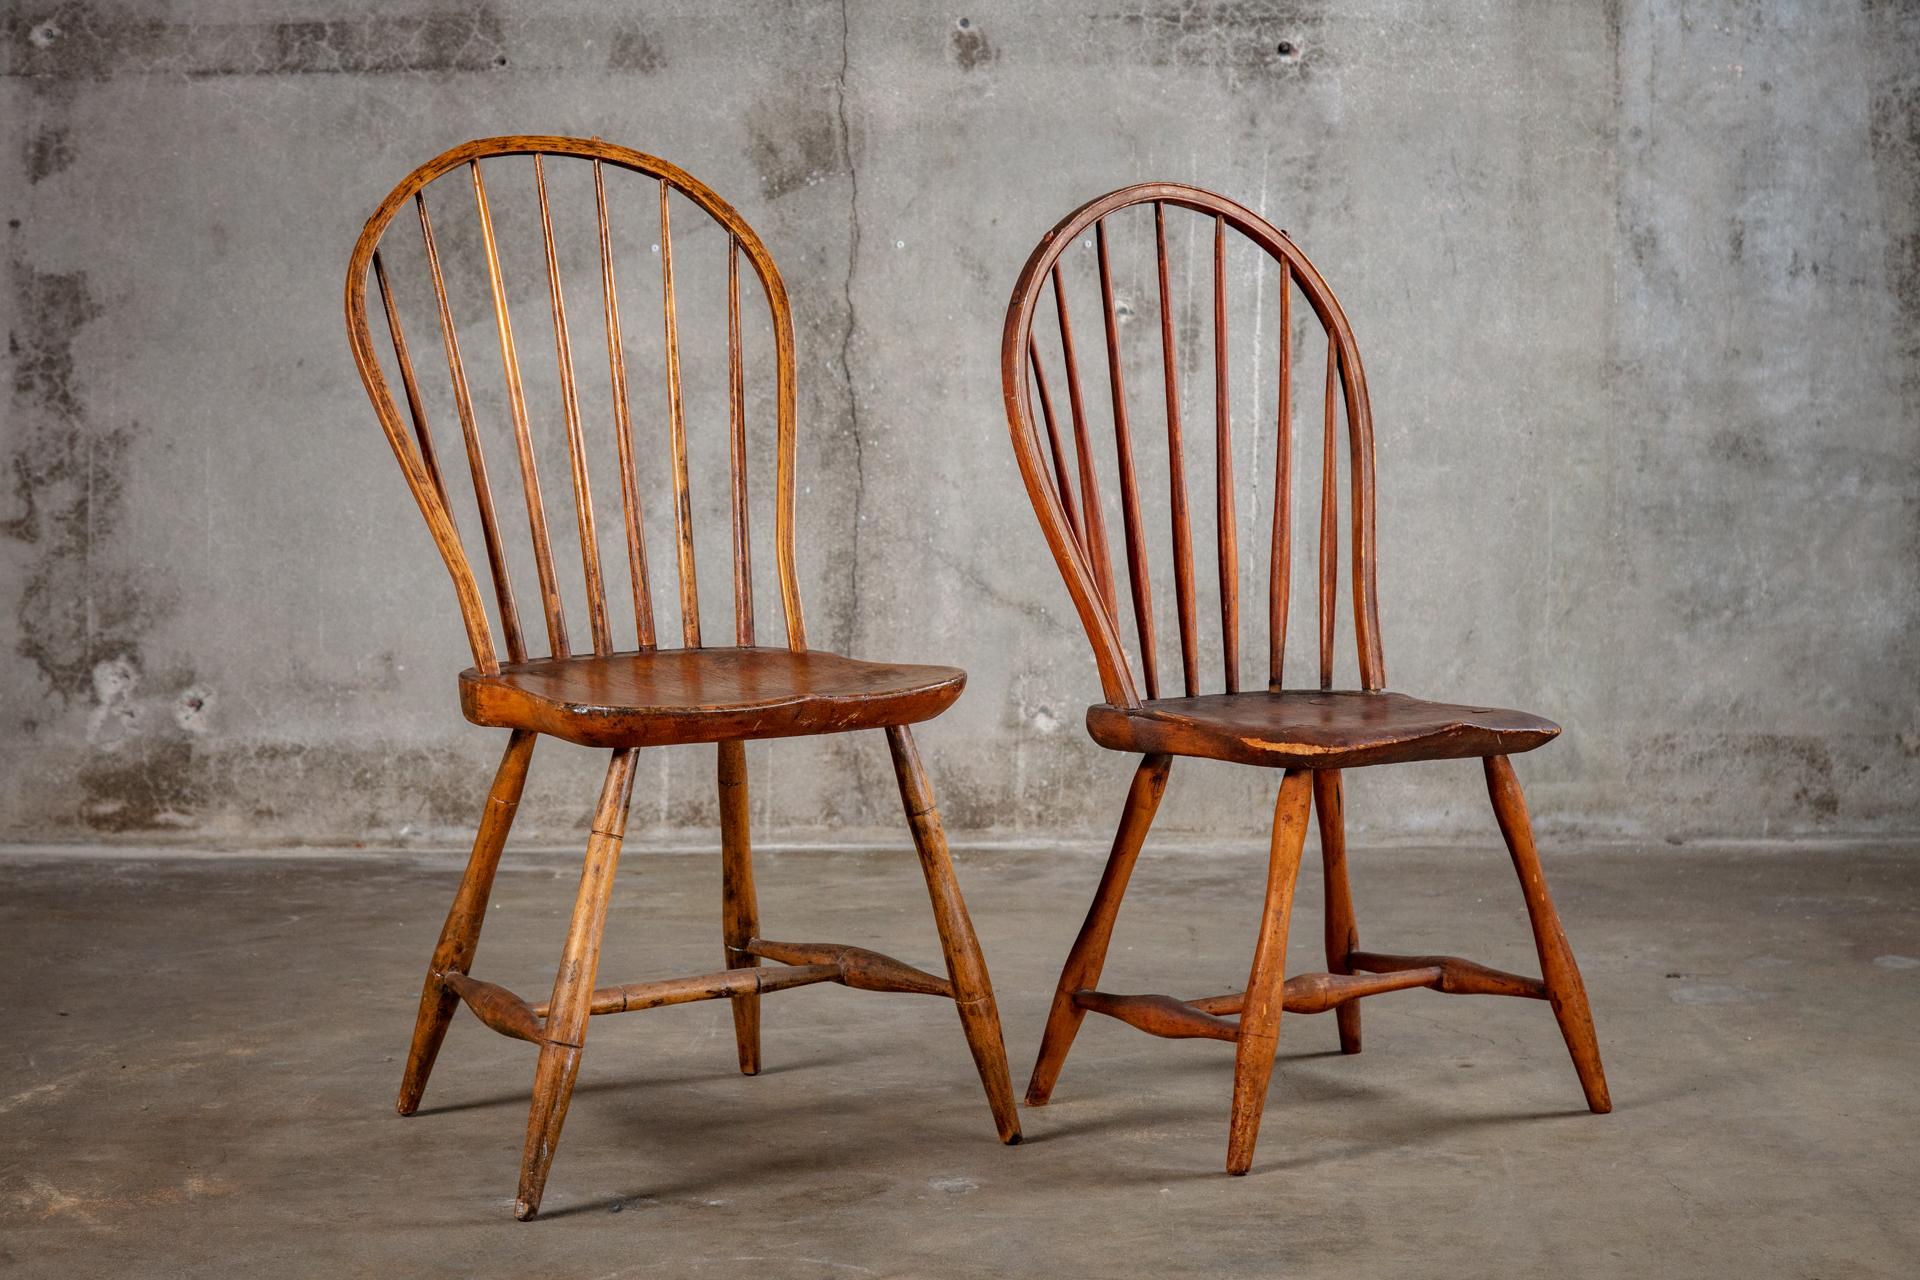 English windsor spindleback side chairs, 19th century (2 available).